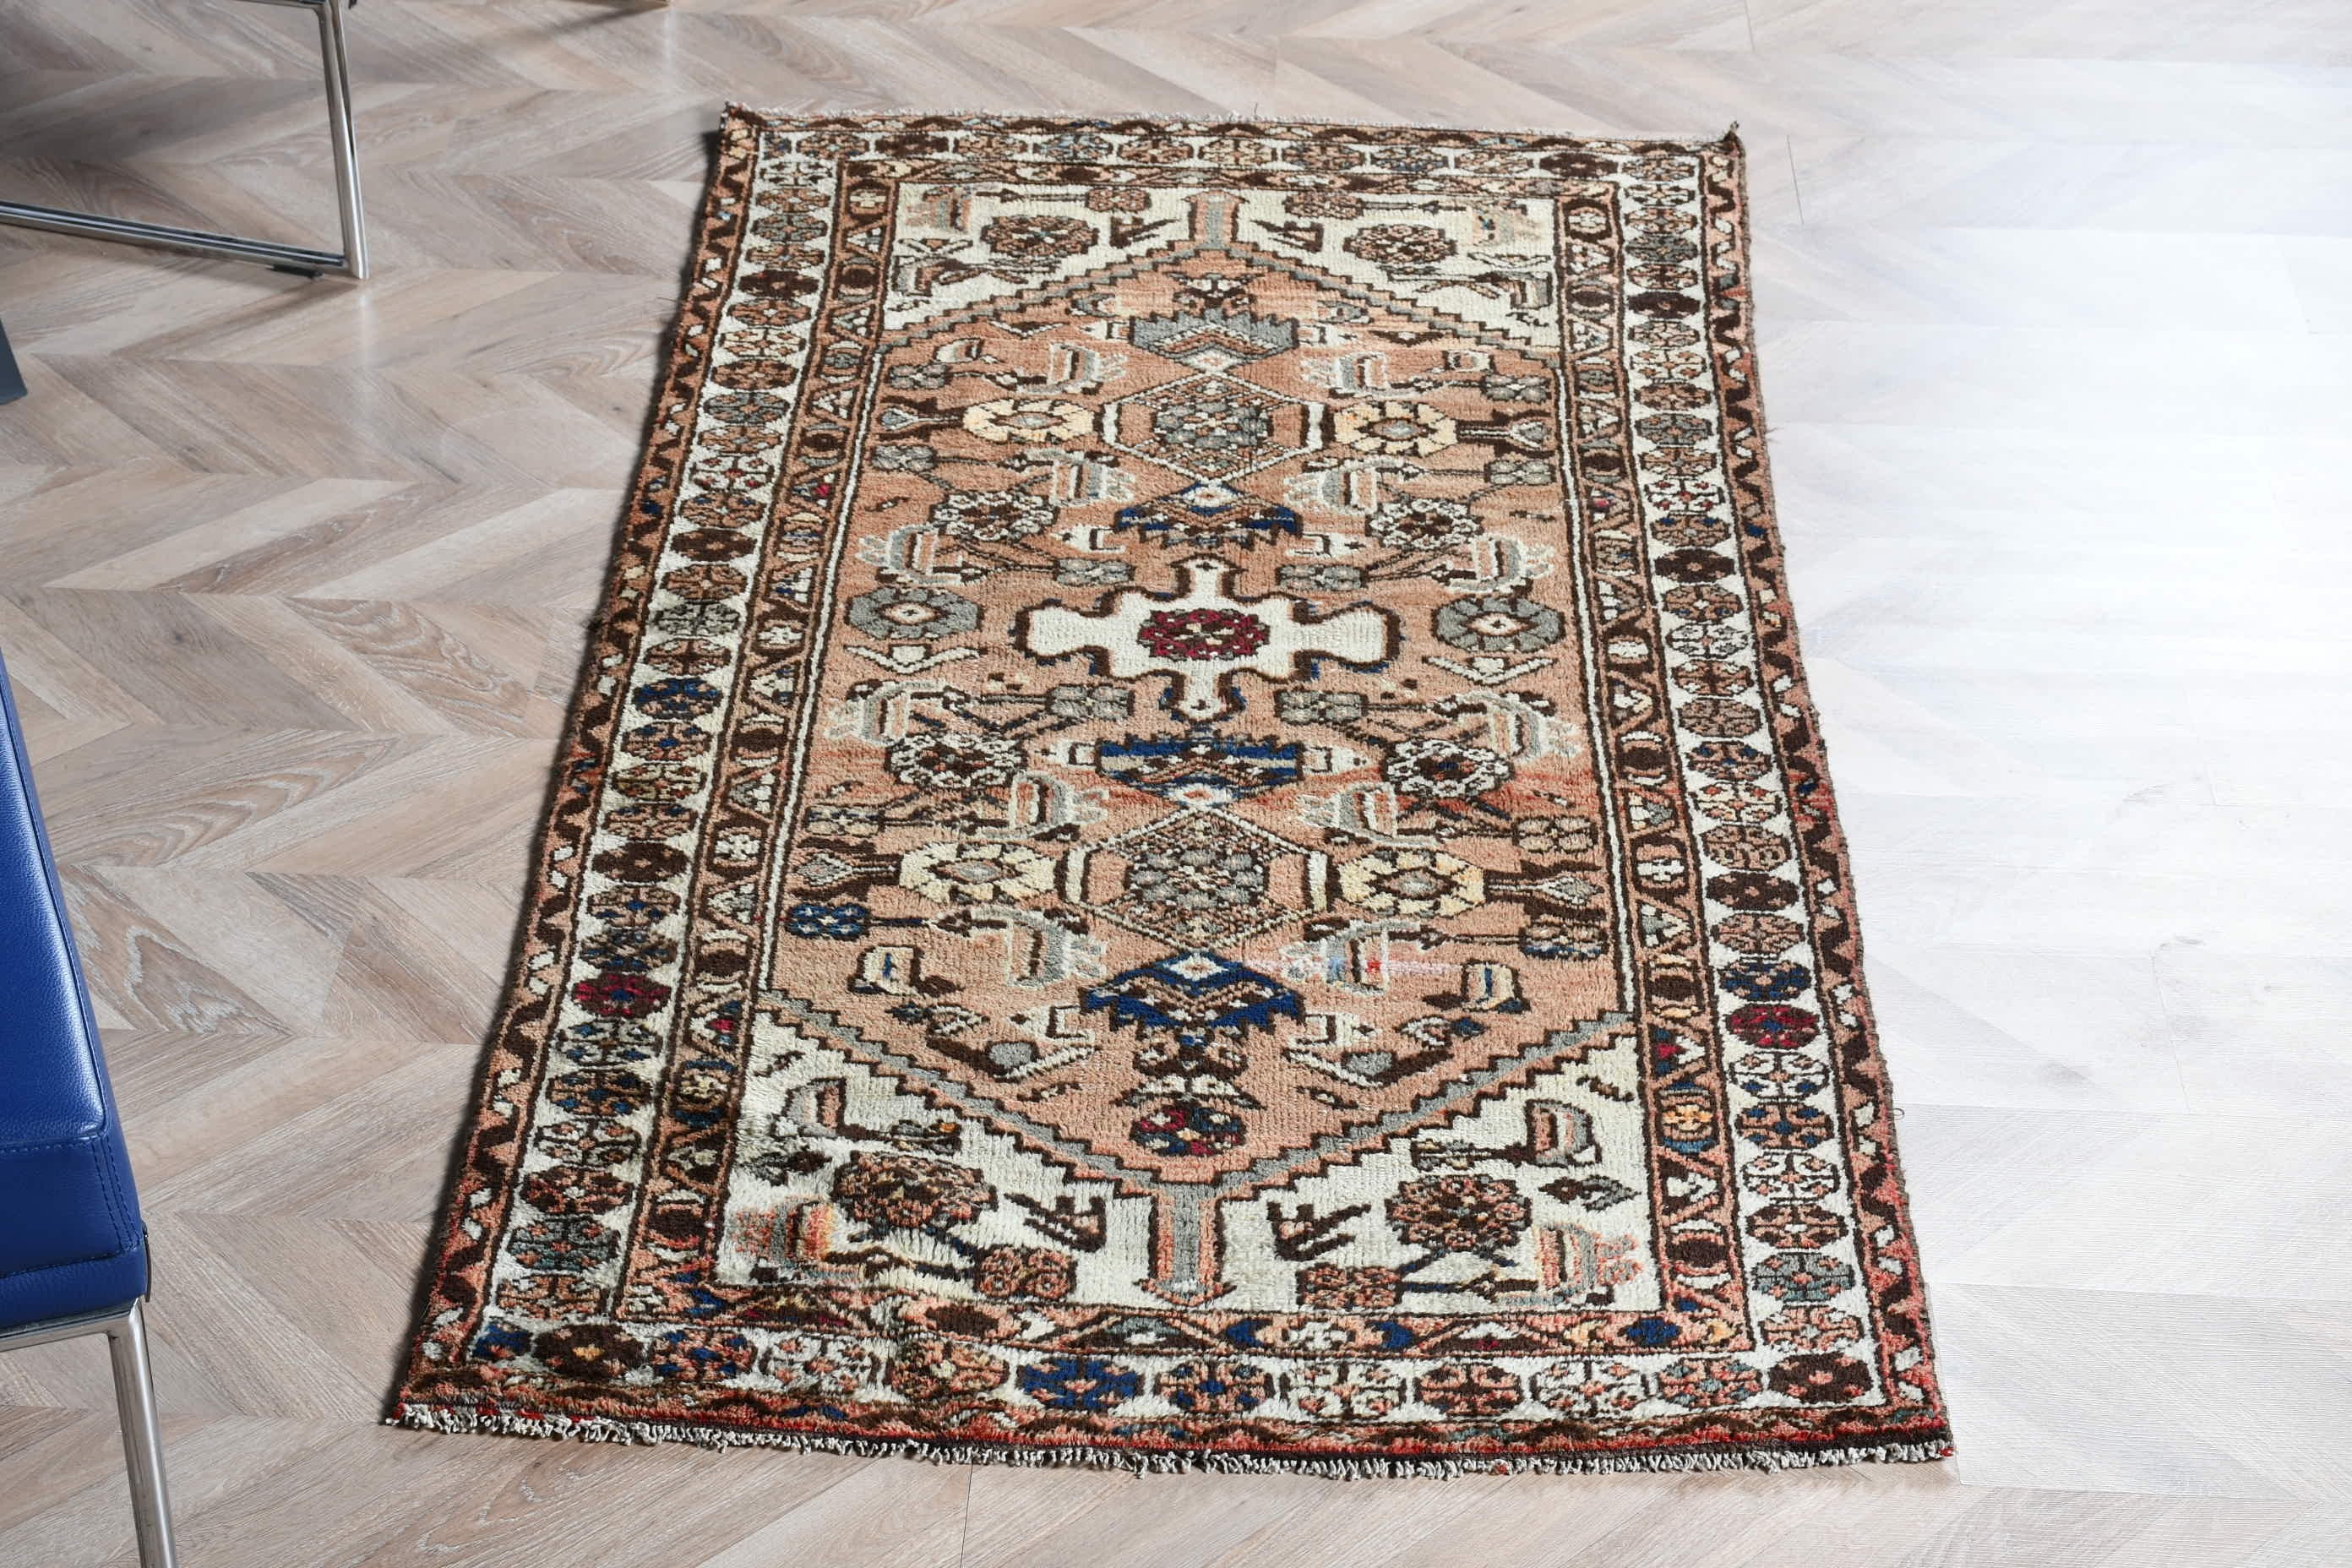 Antique Rug, Brown Home Decor Rugs, Entry Rug, Hand Woven Rug, Turkish Rug, Vintage Rugs, Moroccan Rug, Kitchen Rug, 2.9x6.1 ft Accent Rug